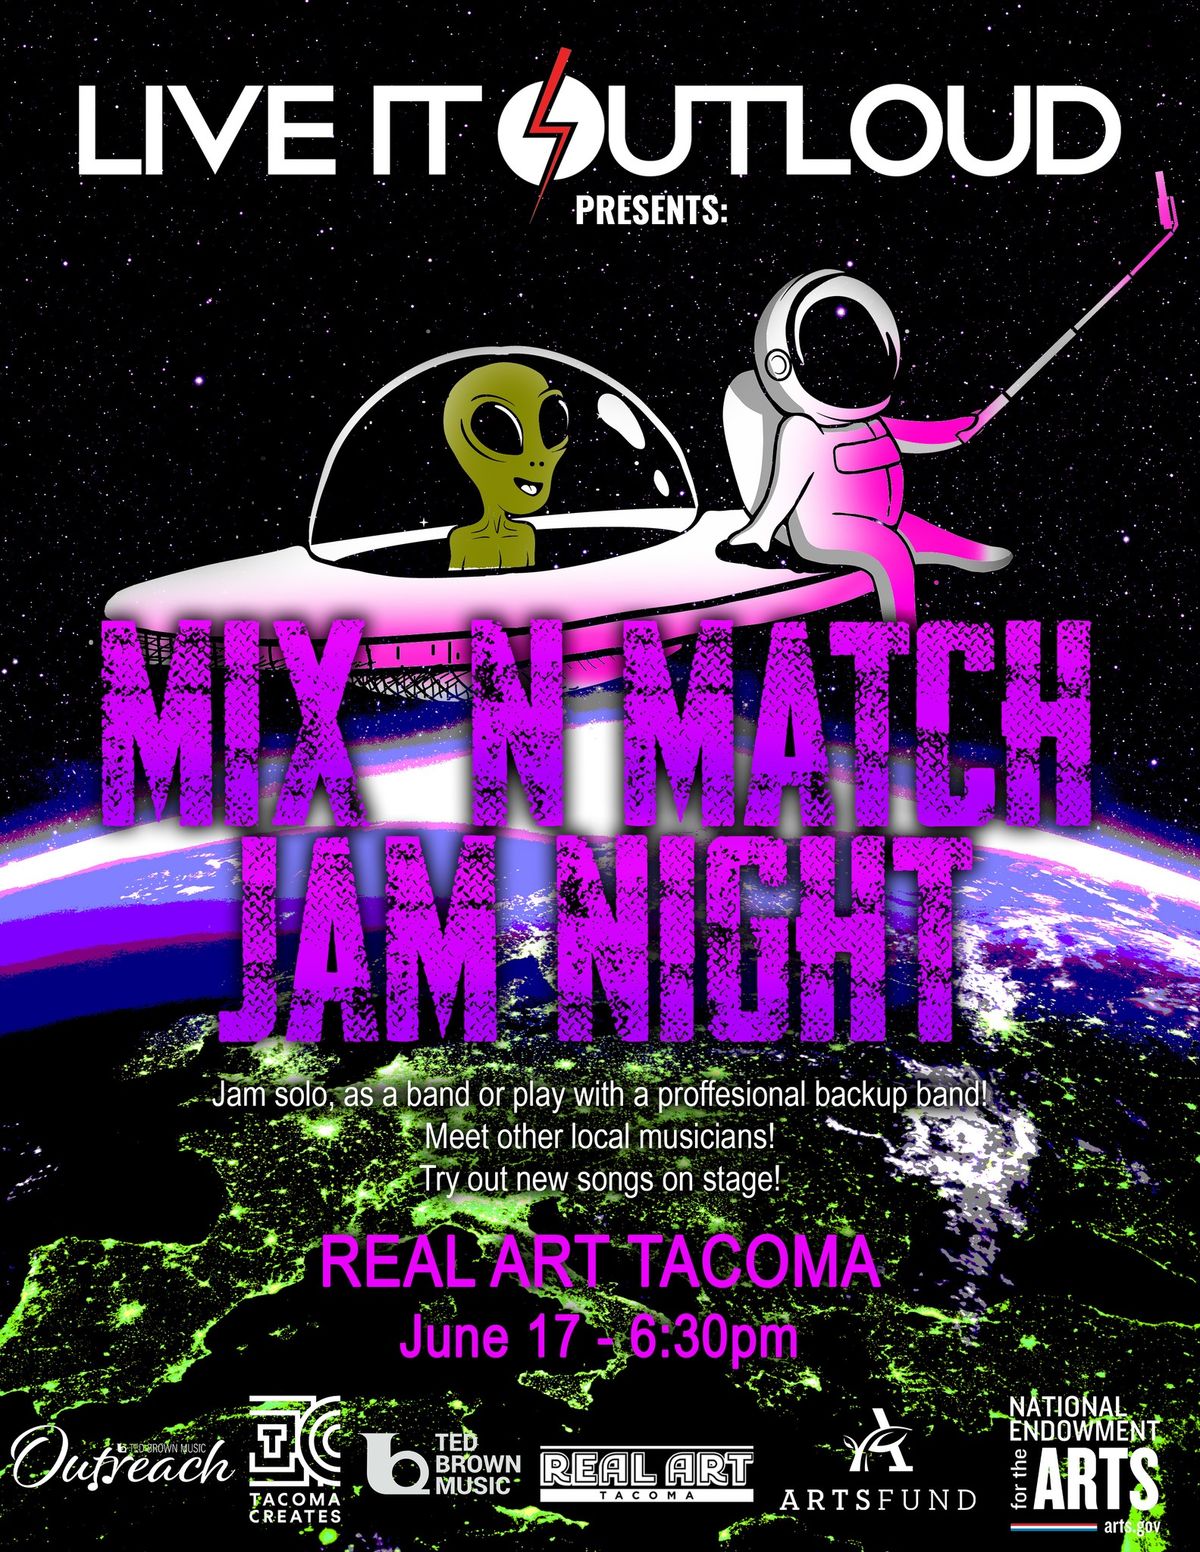 Live It Out Loud Presents: Mix N Match Jam Night